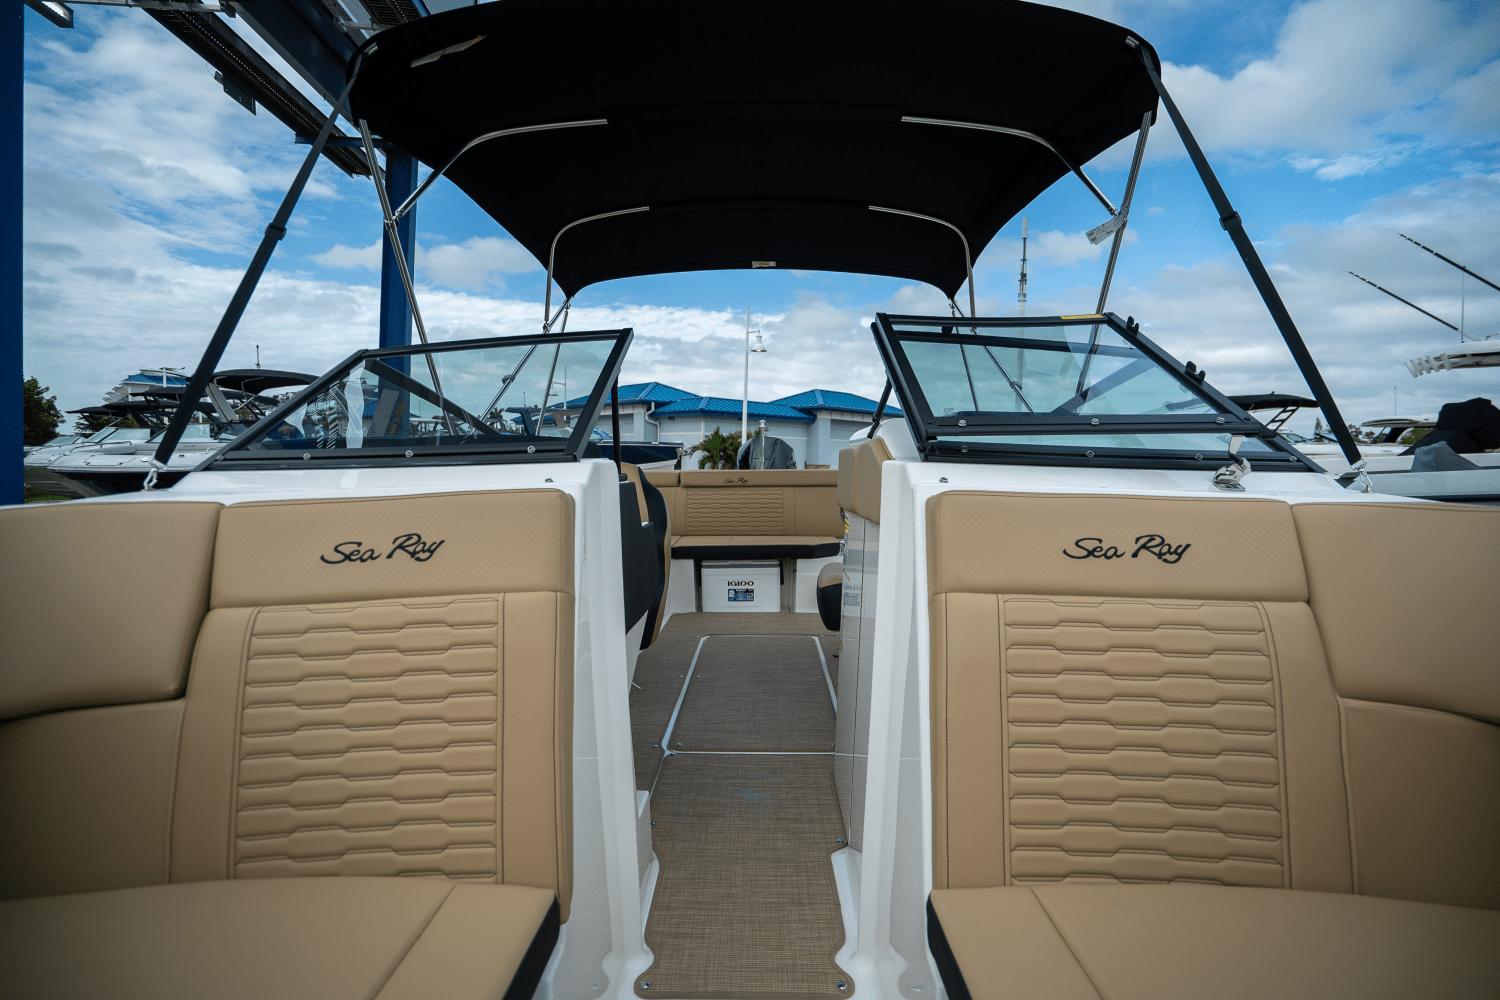 2024 Sea Ray SPX 230 Outboard Runabout for sale - YachtWorld